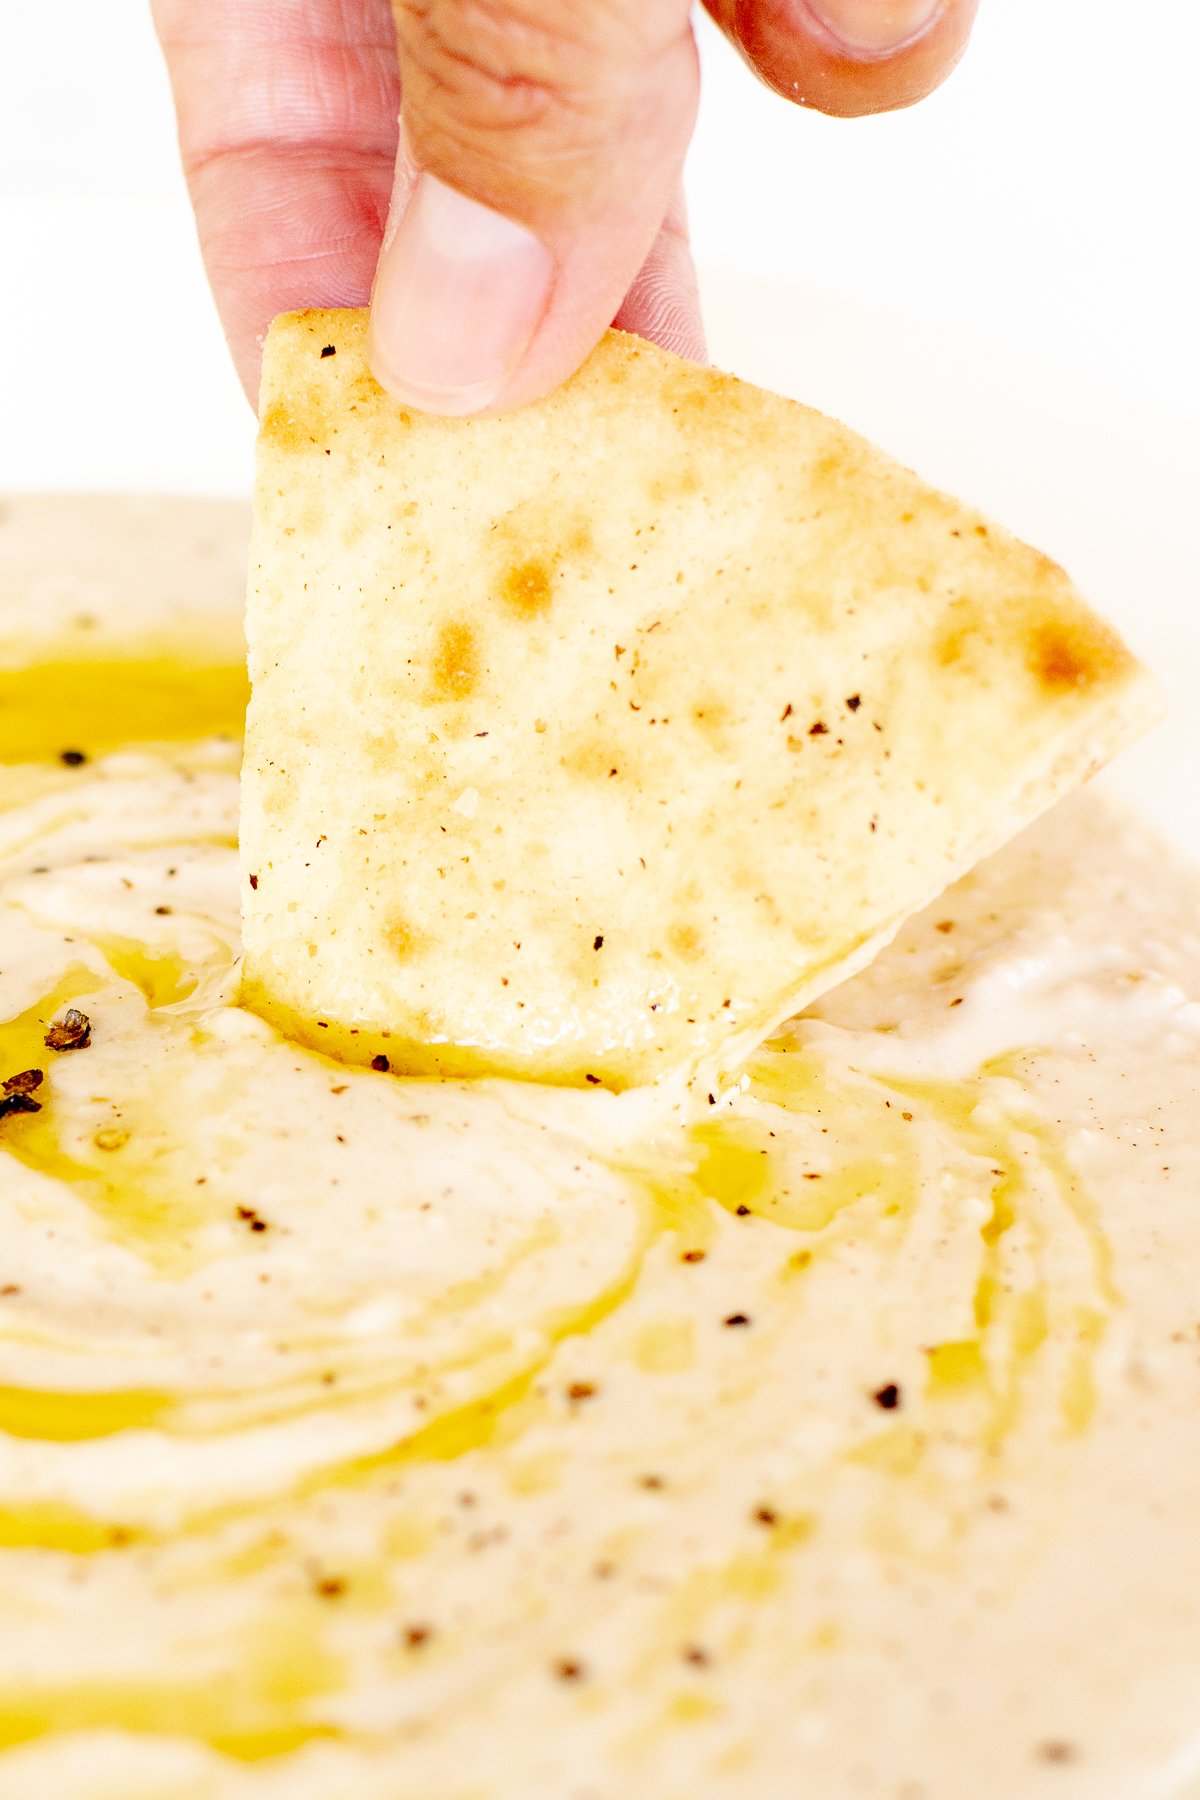 A hand dipping a triangle of pita bread into a bowl of white bean dip.